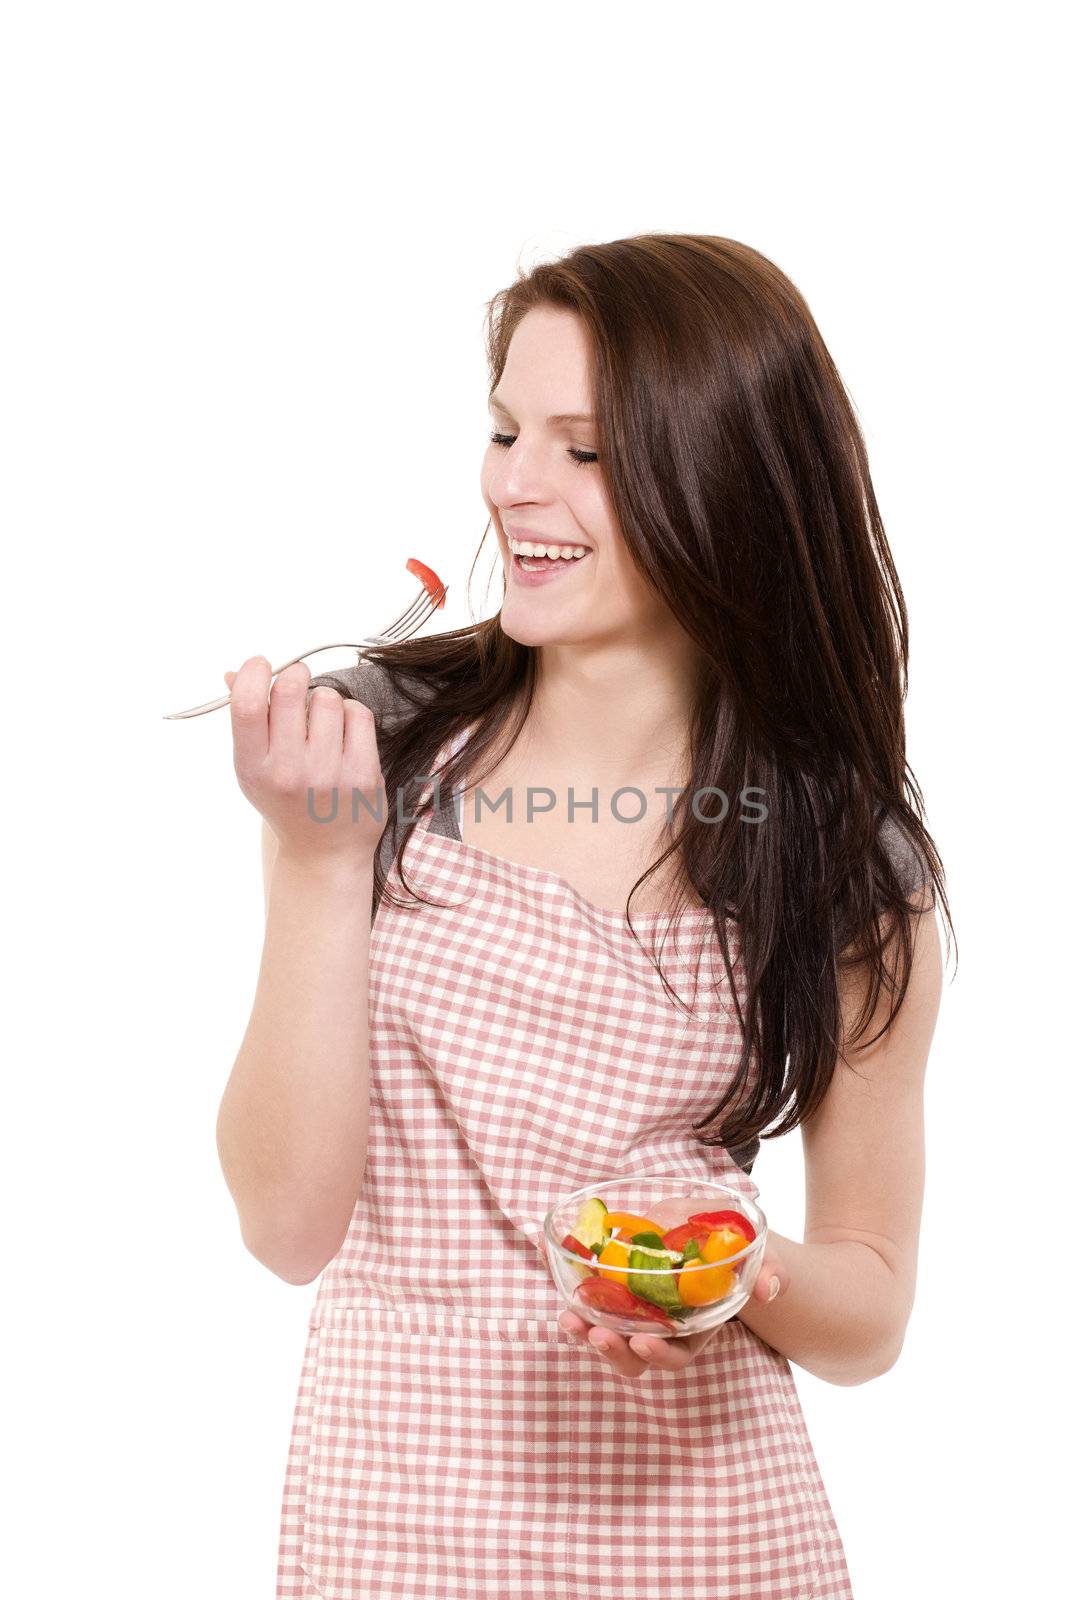 happy young woman with red apron eating salad on white background